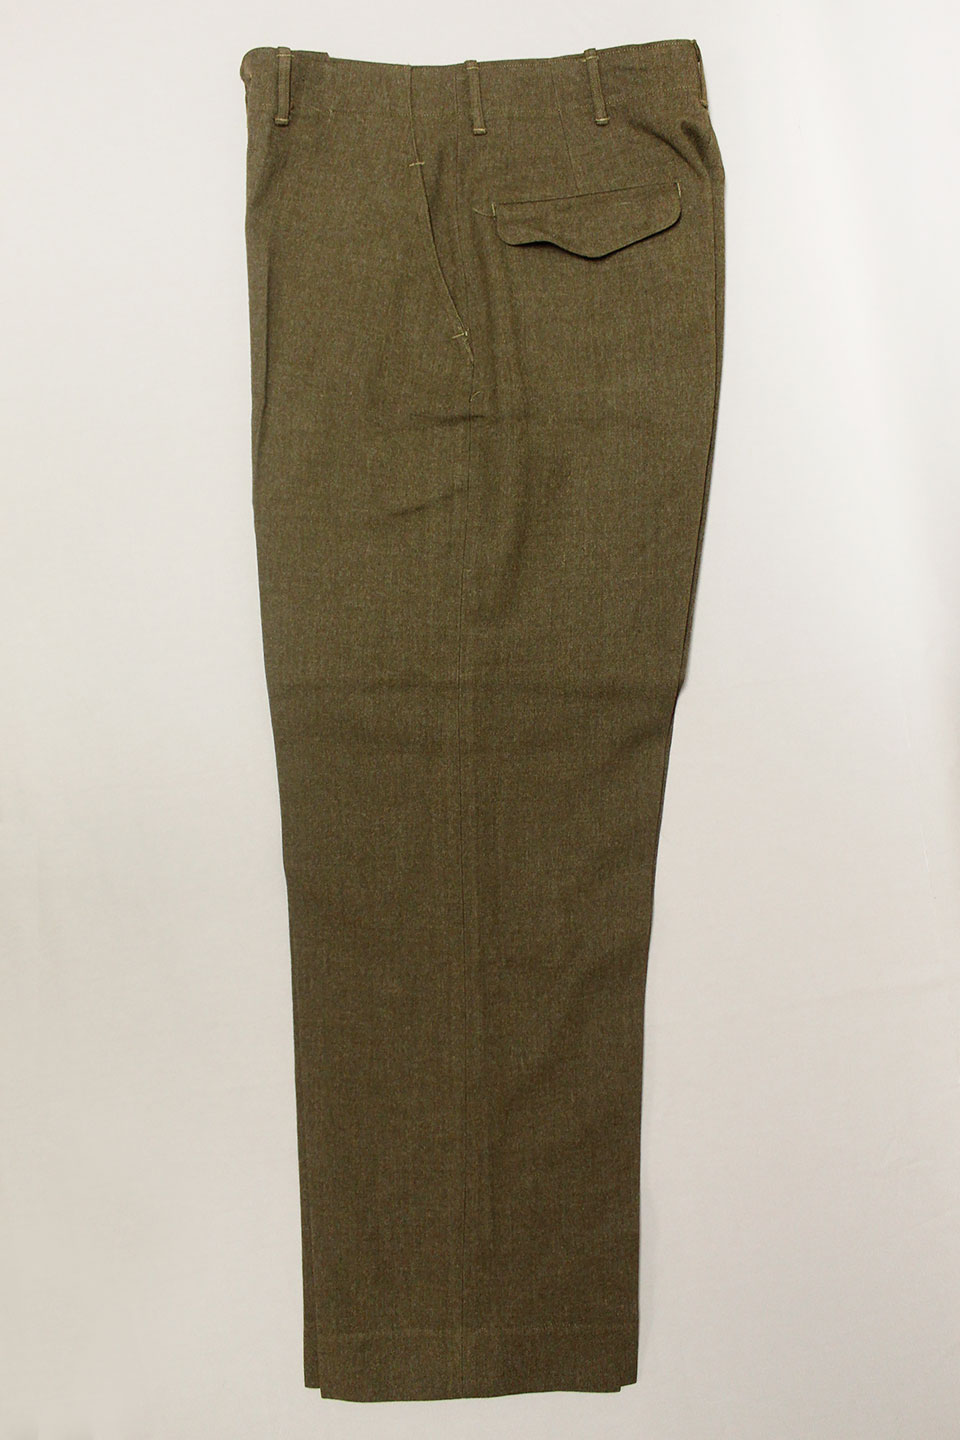 US Army Pattern 1945 Wool Combat Trousers 31X31 . UA948 - Time Traveler ...